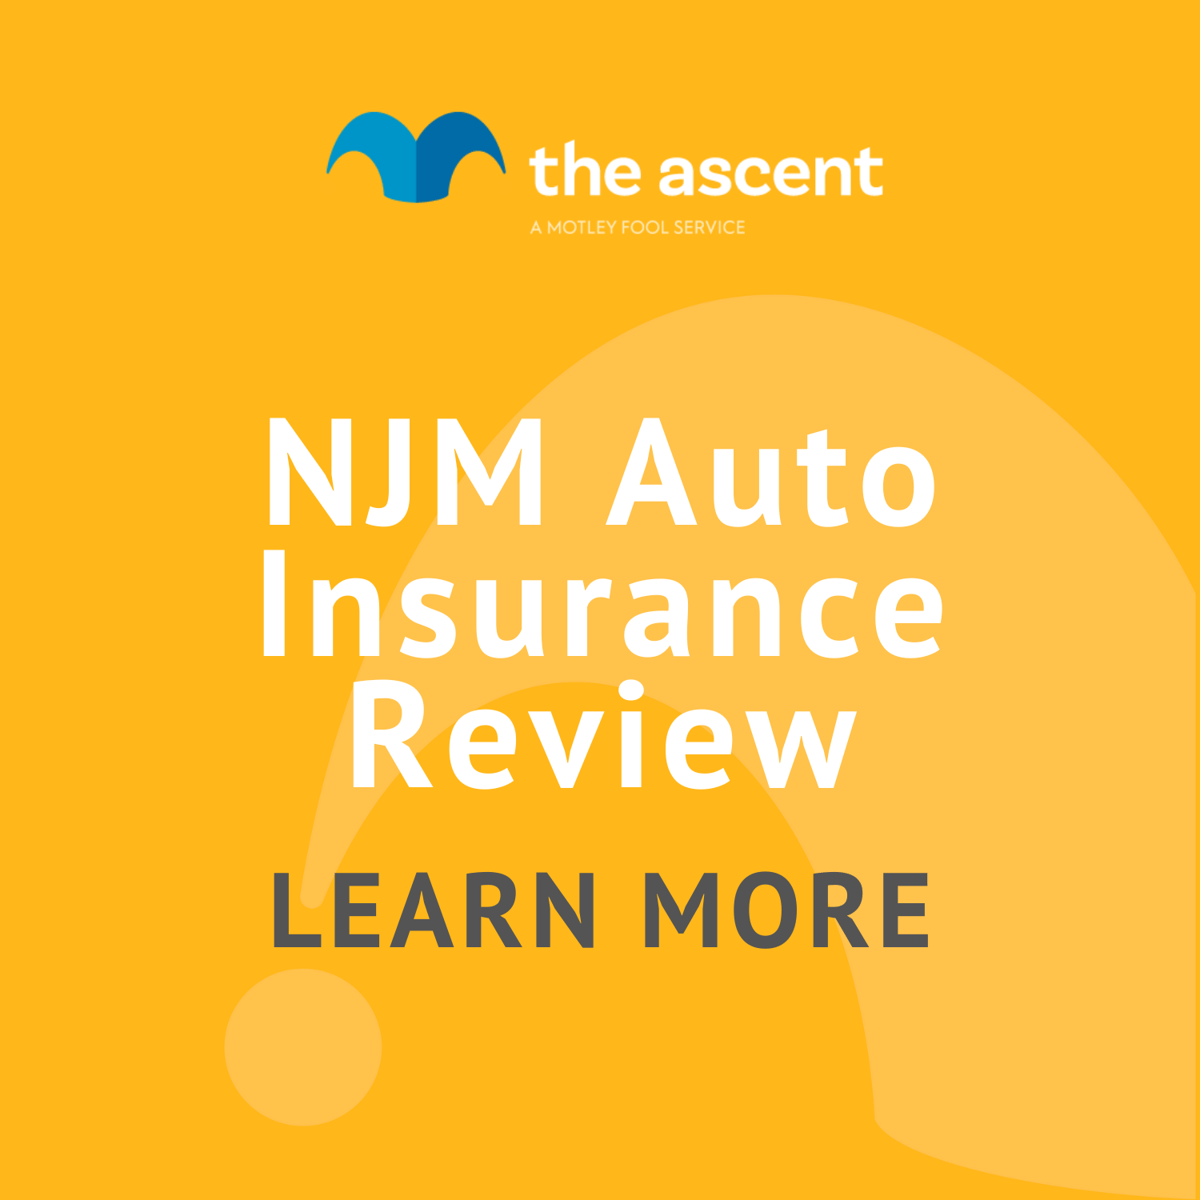 Njm Auto Insurance Review The Motley Fool